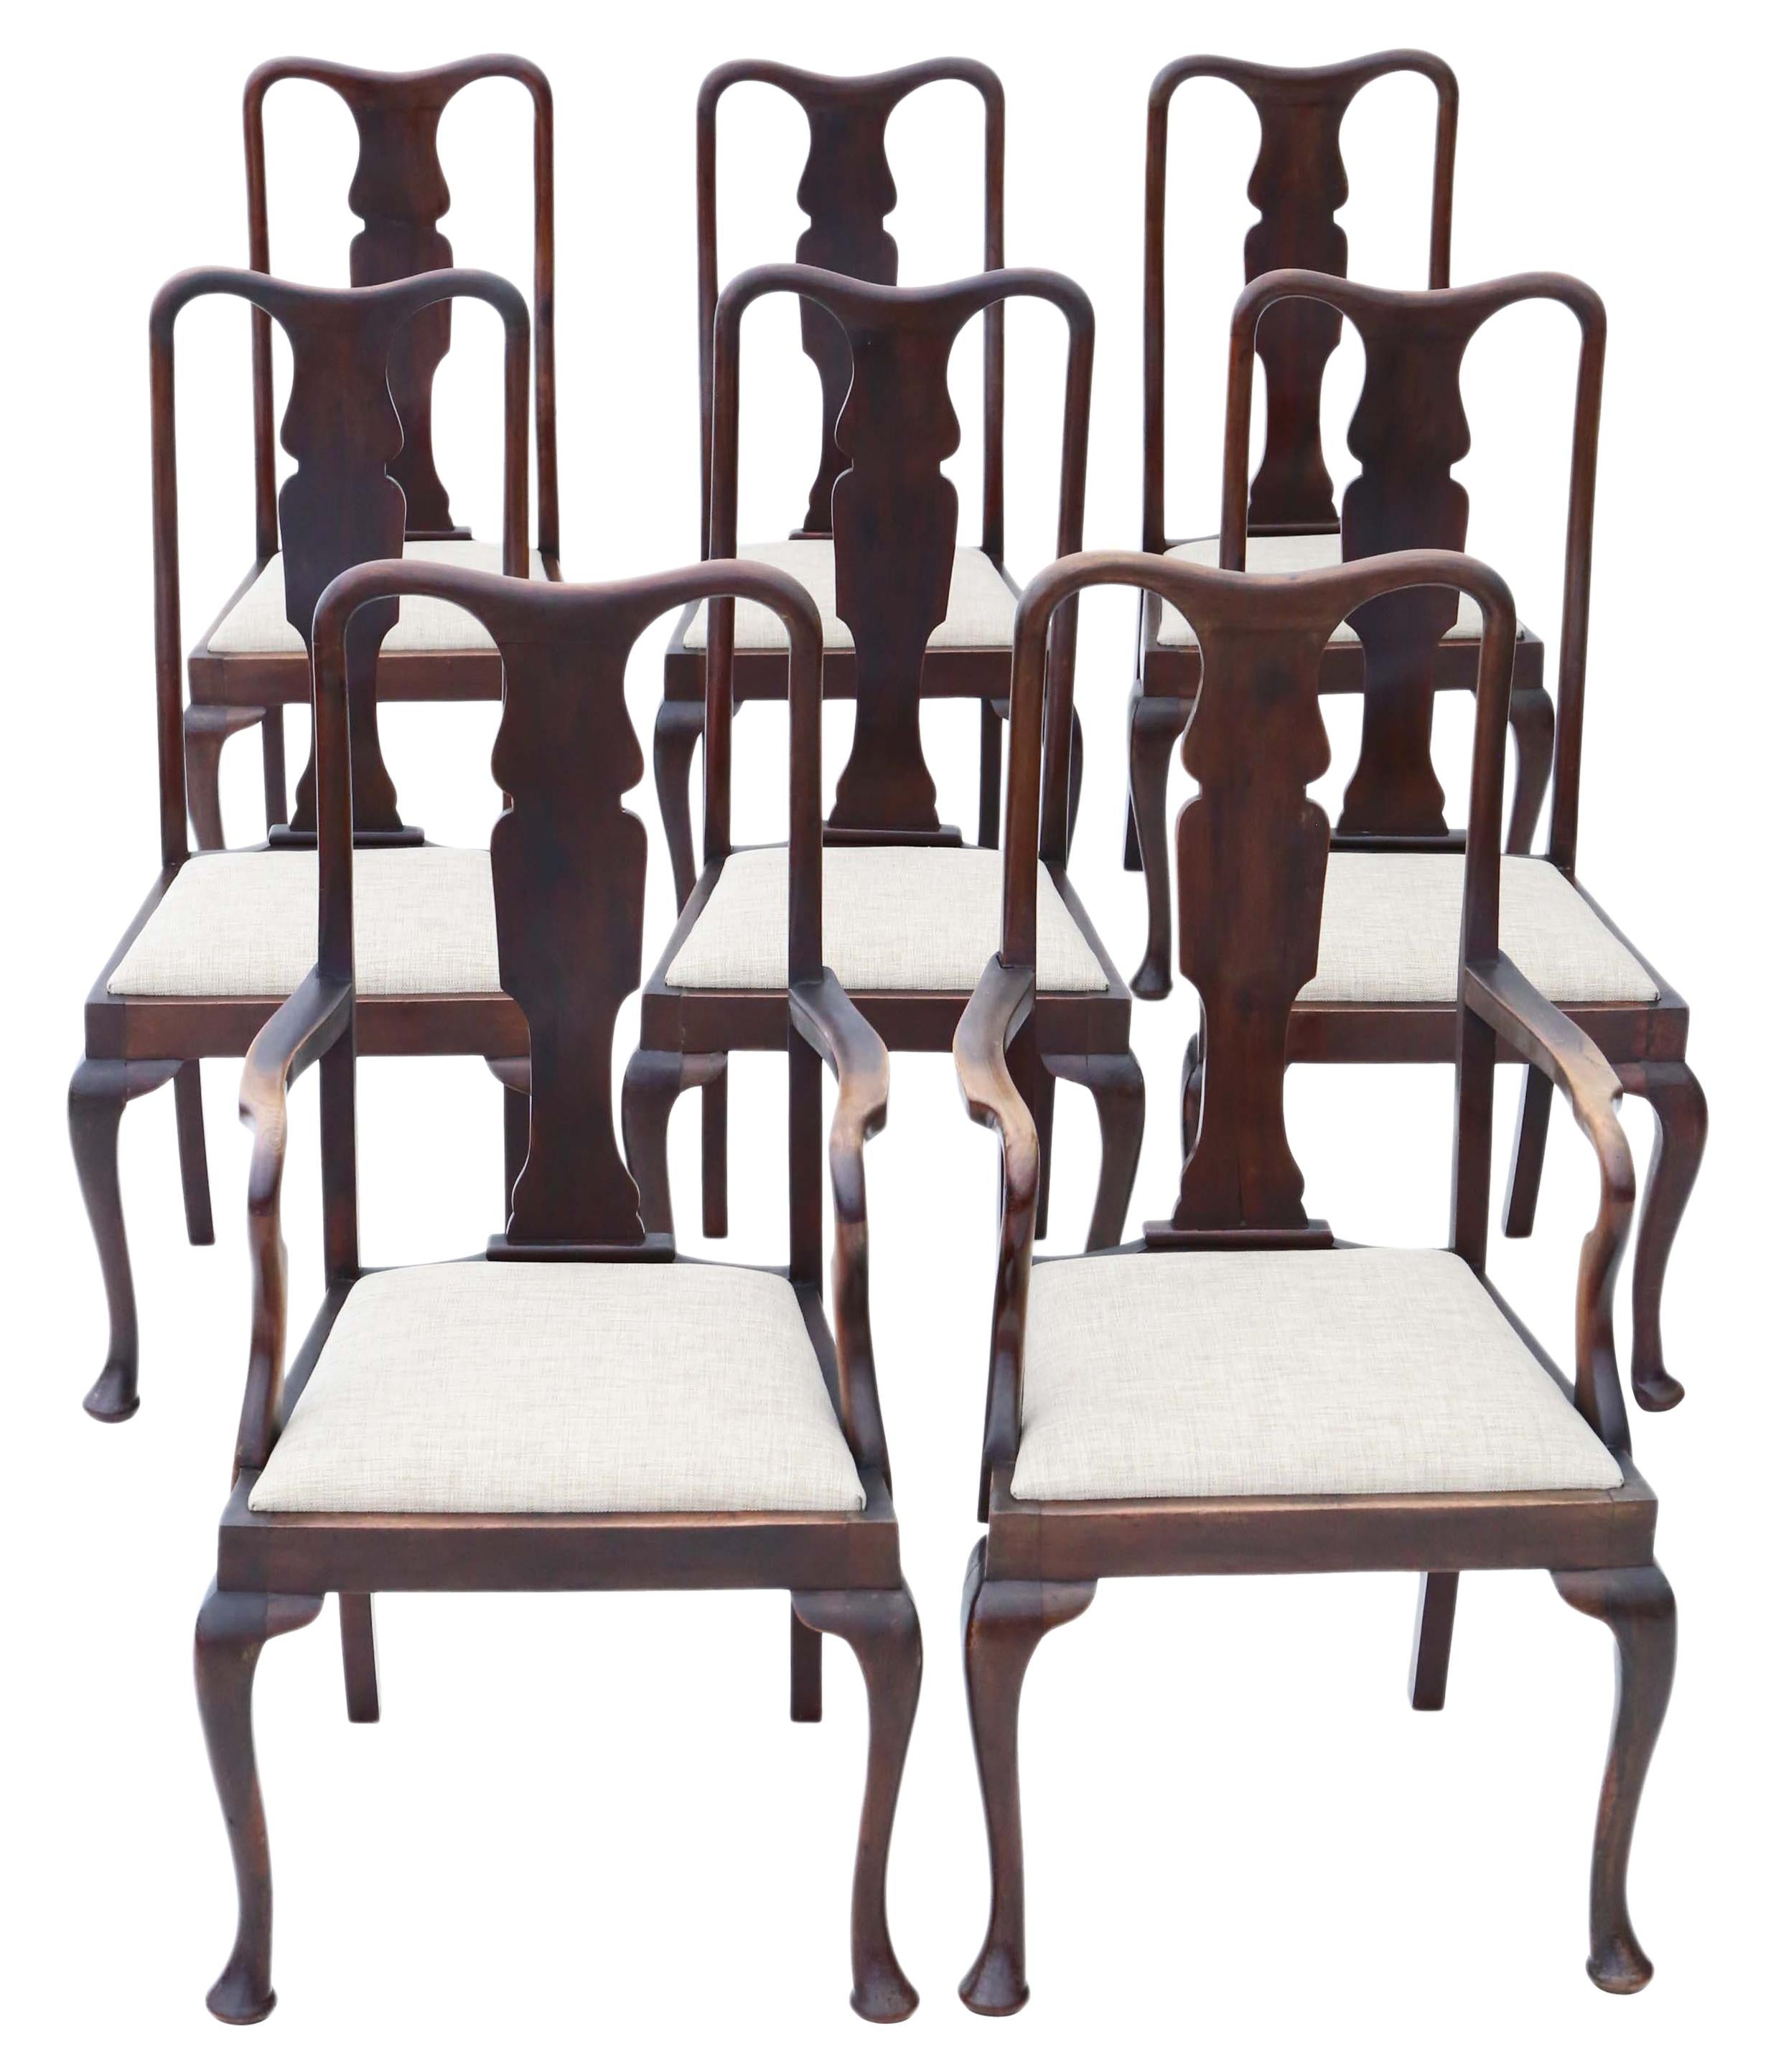 Set of 8 '6+2' Mahogany Queen Anne Revival Dining Chairs